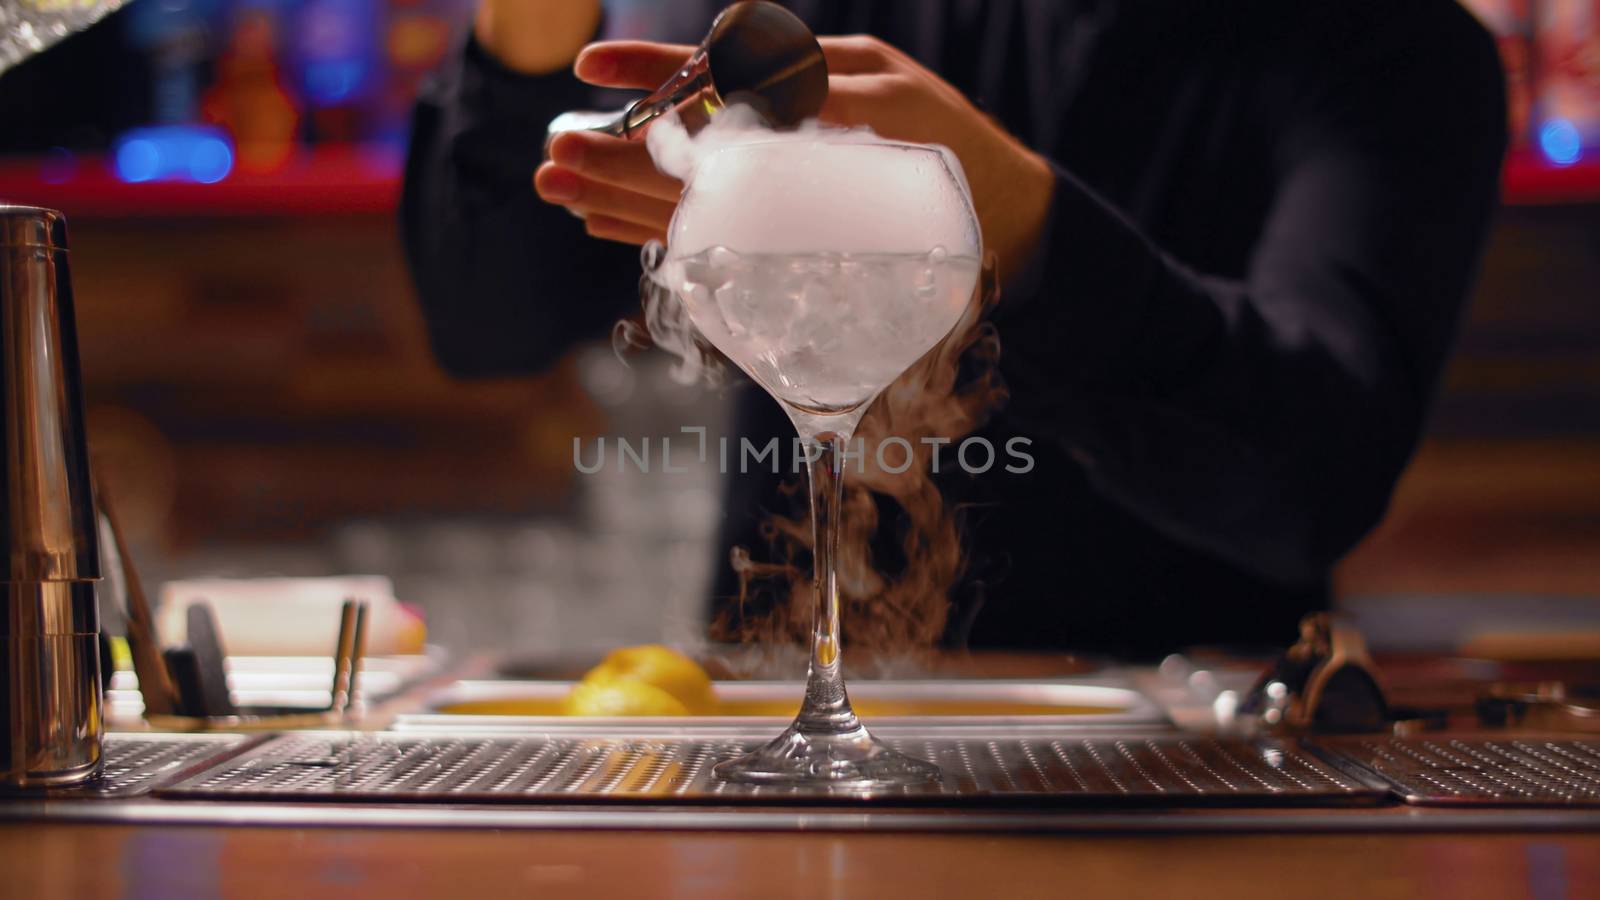 Barman cooking drink with dry ice. Wine glass wrapped in steam on the bar counter. Bartender pouring an alcoholic drink into it